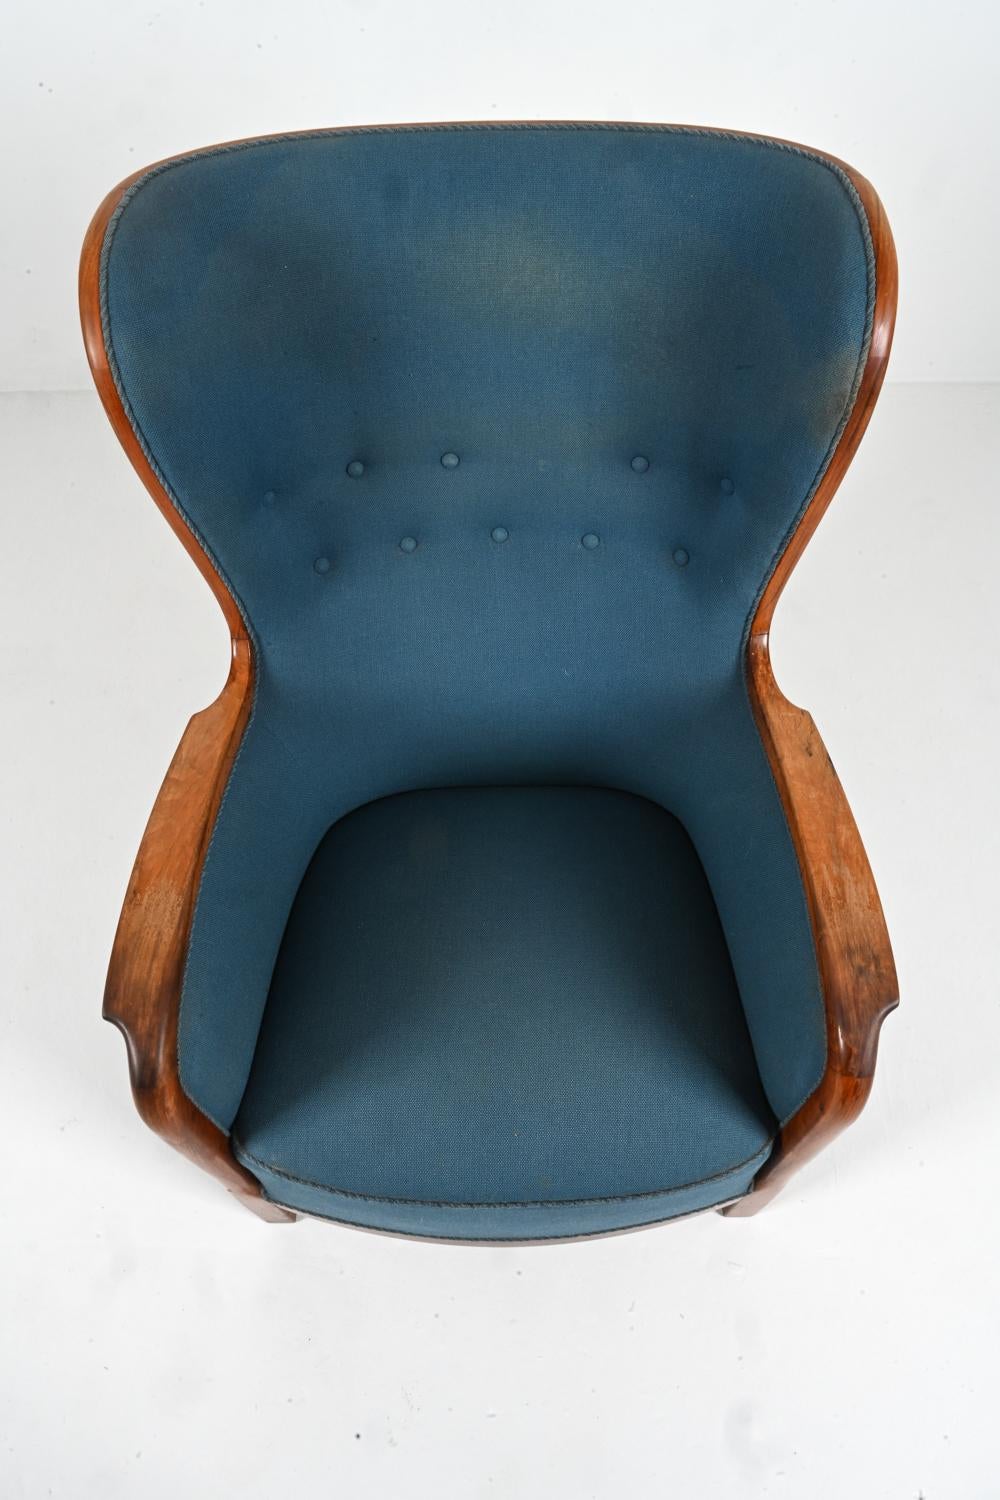 Mid-Century Modern Danish Mahogany Wingback Easy Chair by Frits Henningsen, c. 1940's For Sale